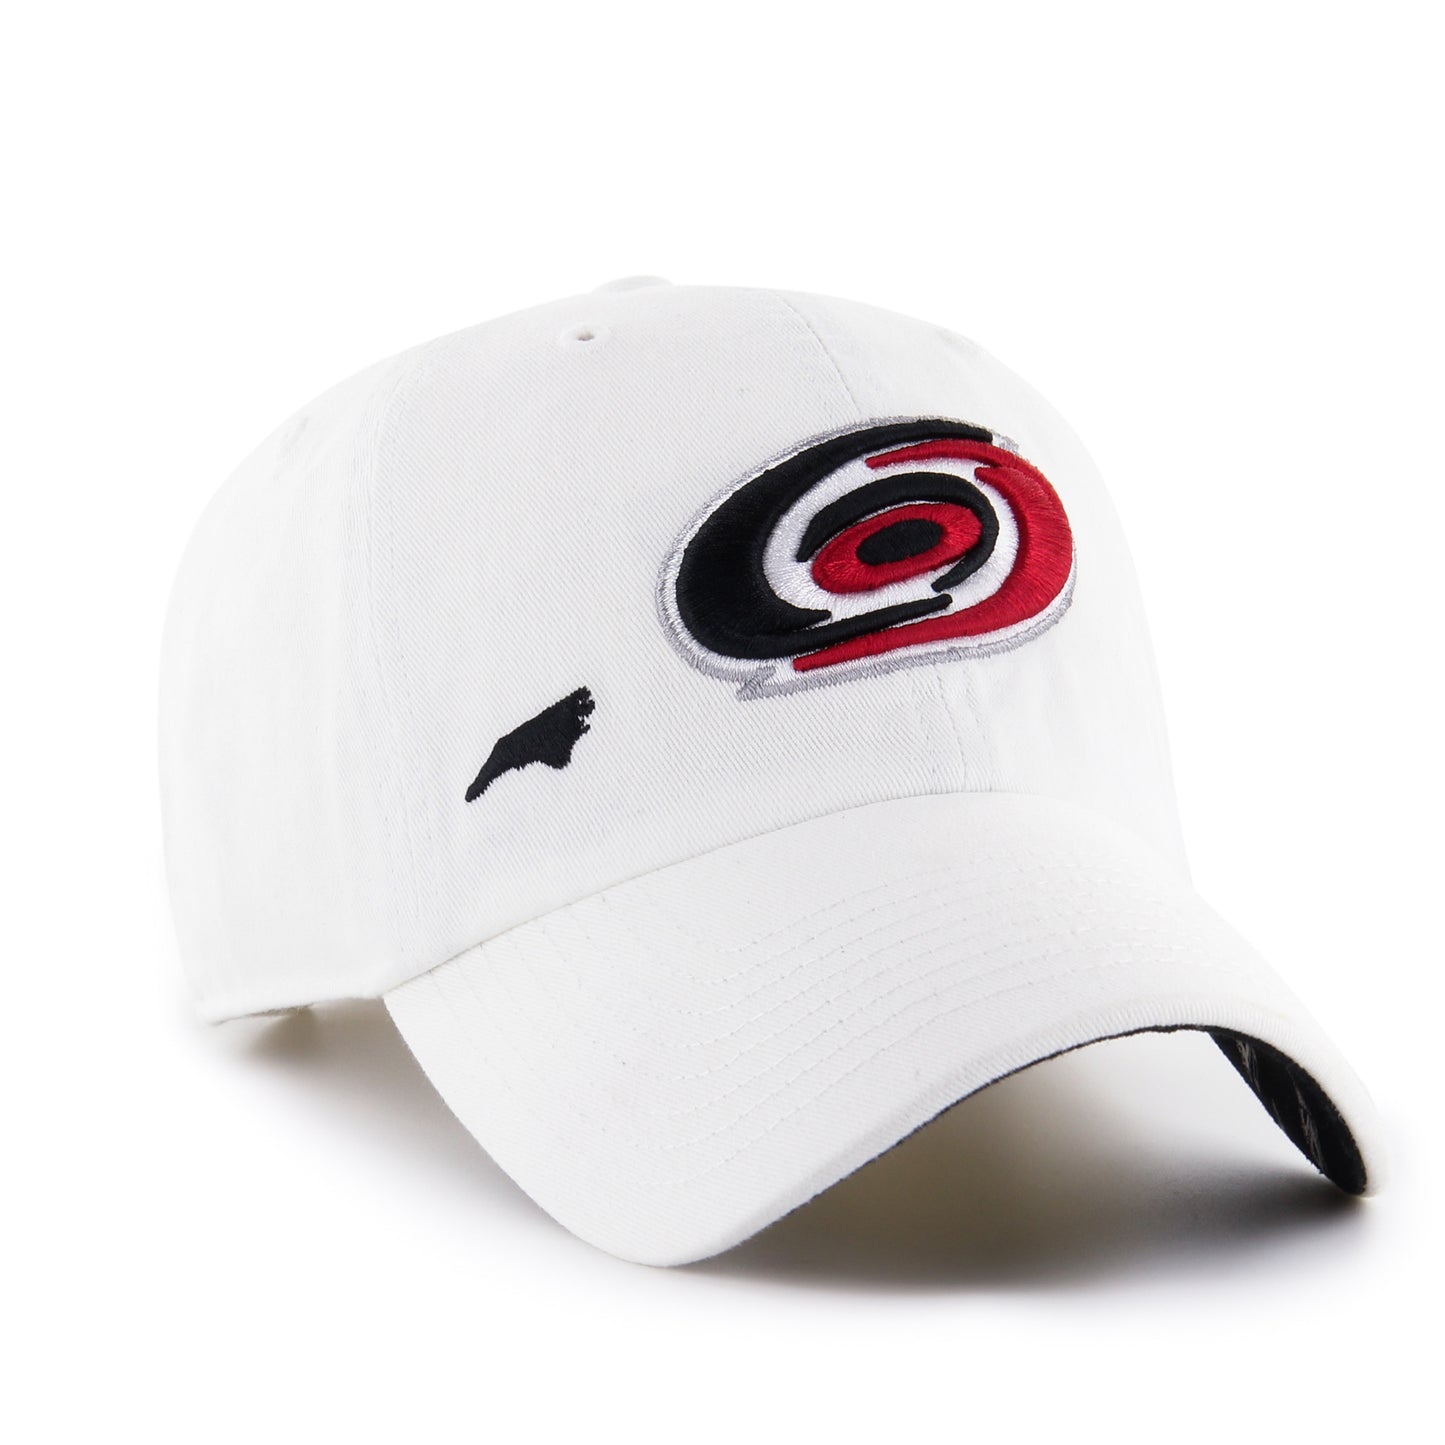 Front View: White 47 brand hat with the Hurricanes primary logo and a small black patch shaped like the state of North Carolina.